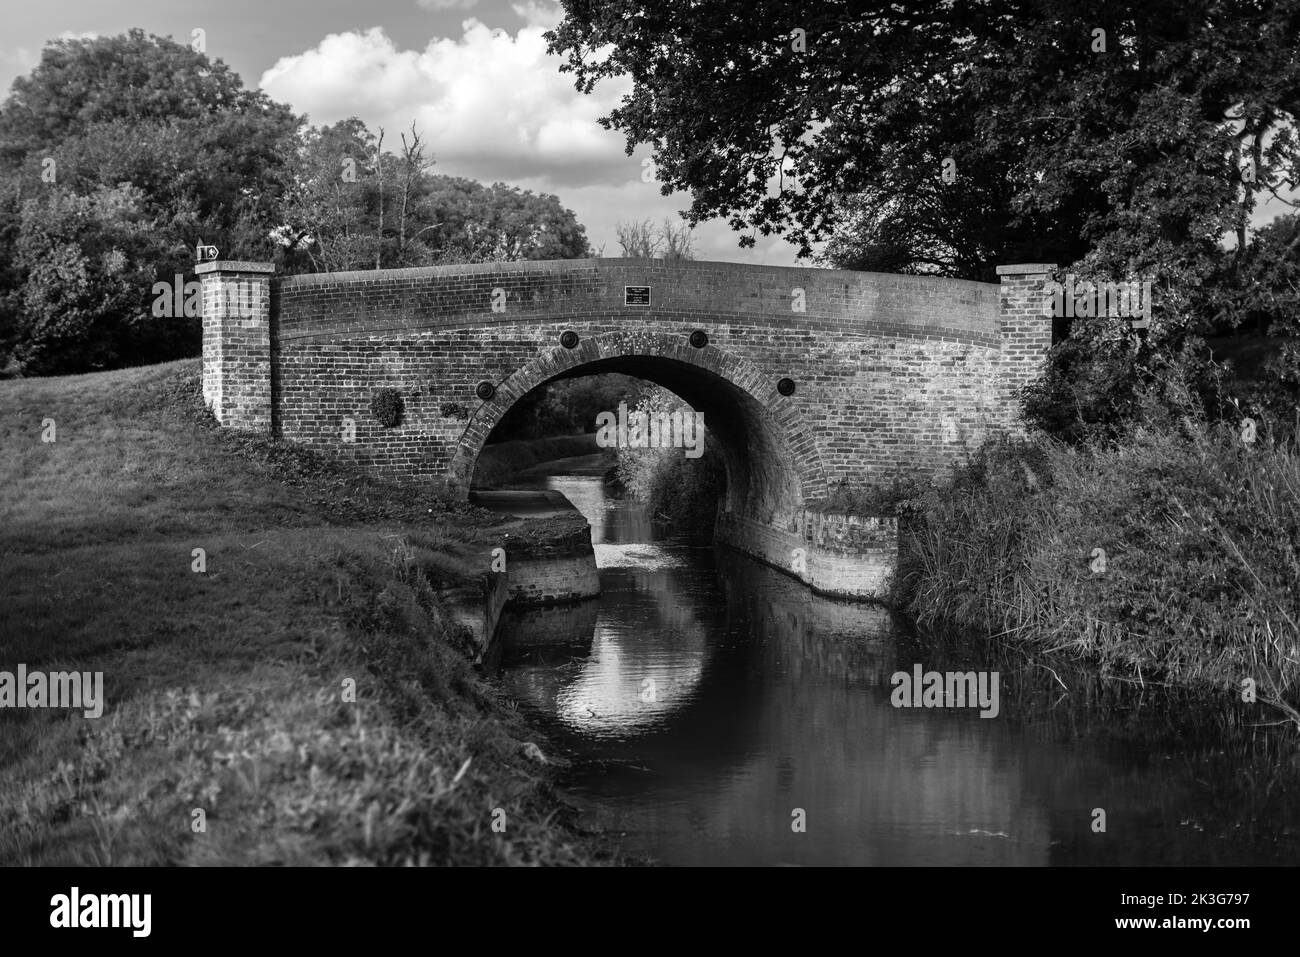 Red brick Double Bridge on the old canal between Pewsham and Lacock, restored by THe Wilts. and Berks. Canal Trust. Autumn day. Stock Photo